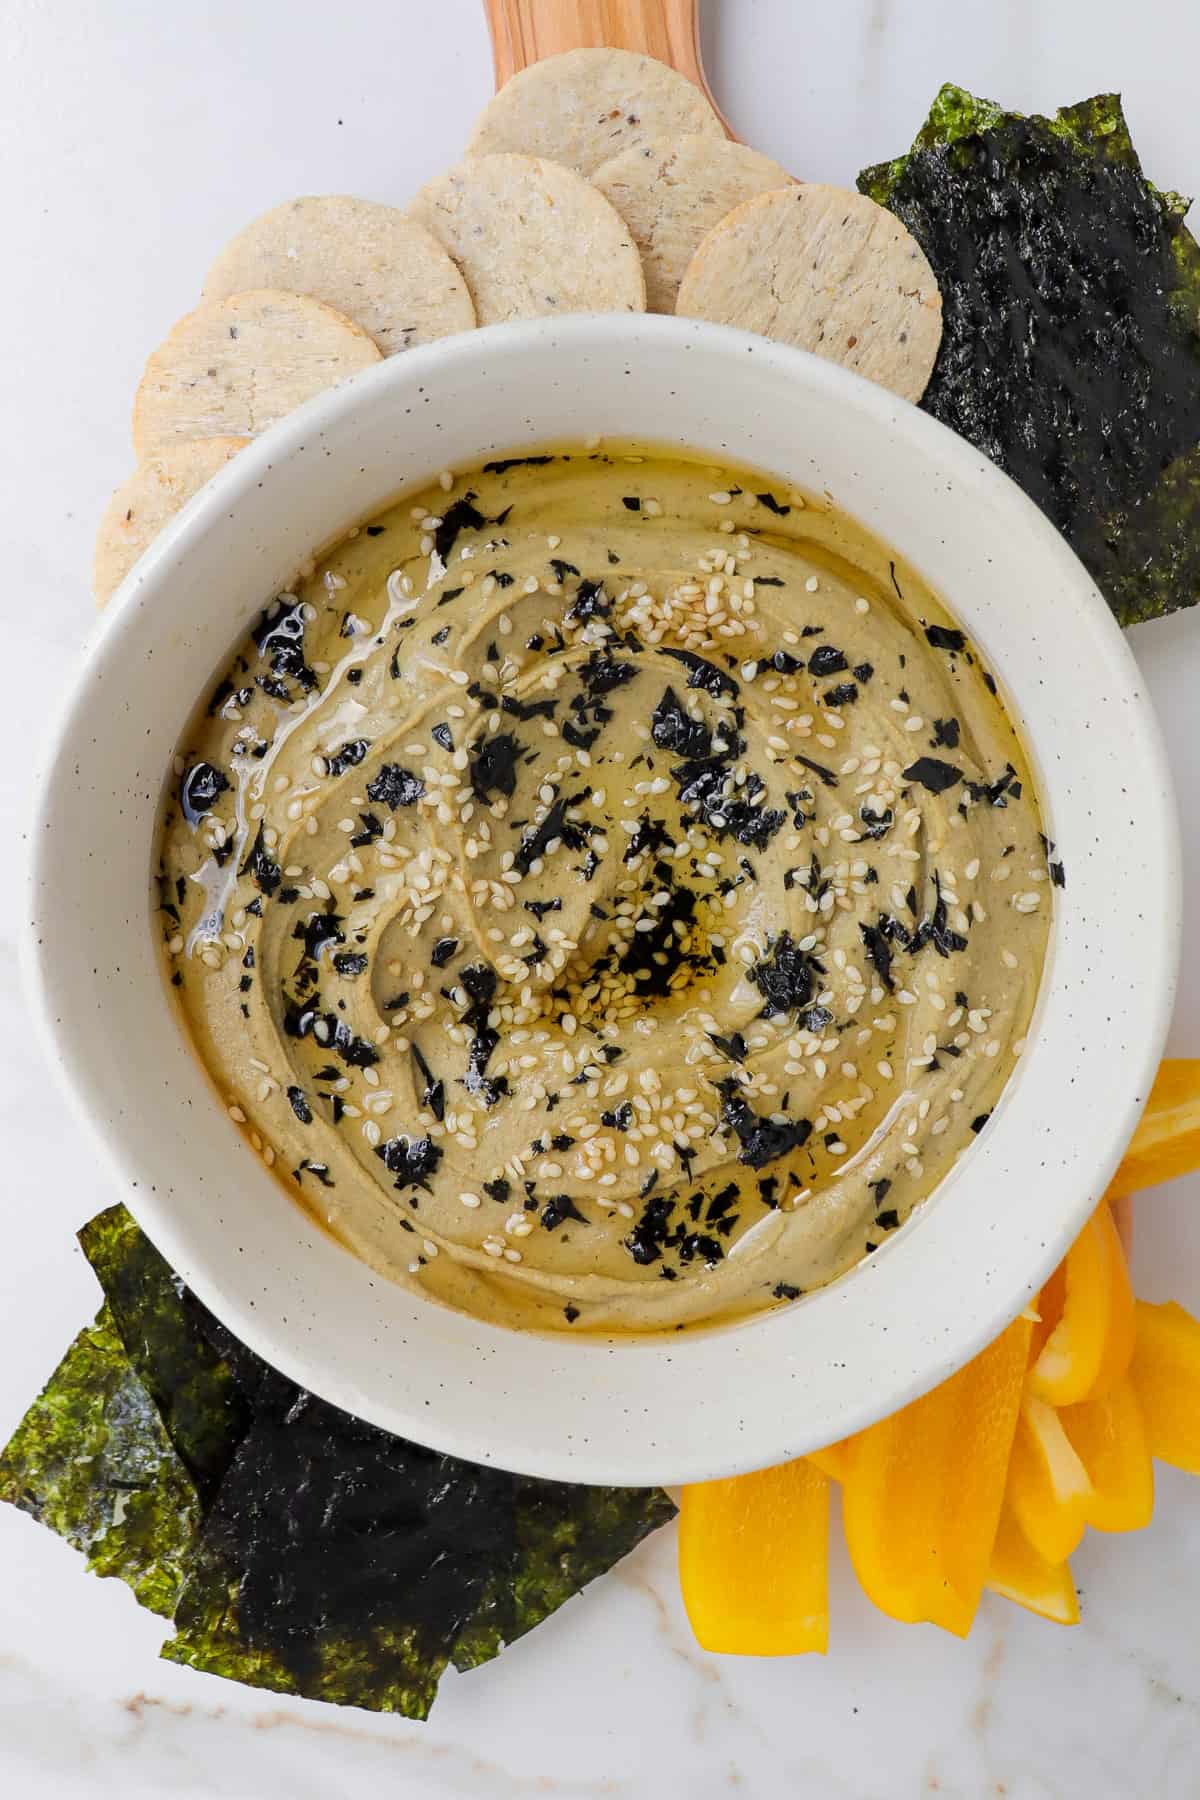 Hummus in a bowl with seaweed, crackers and peppers on the sides.